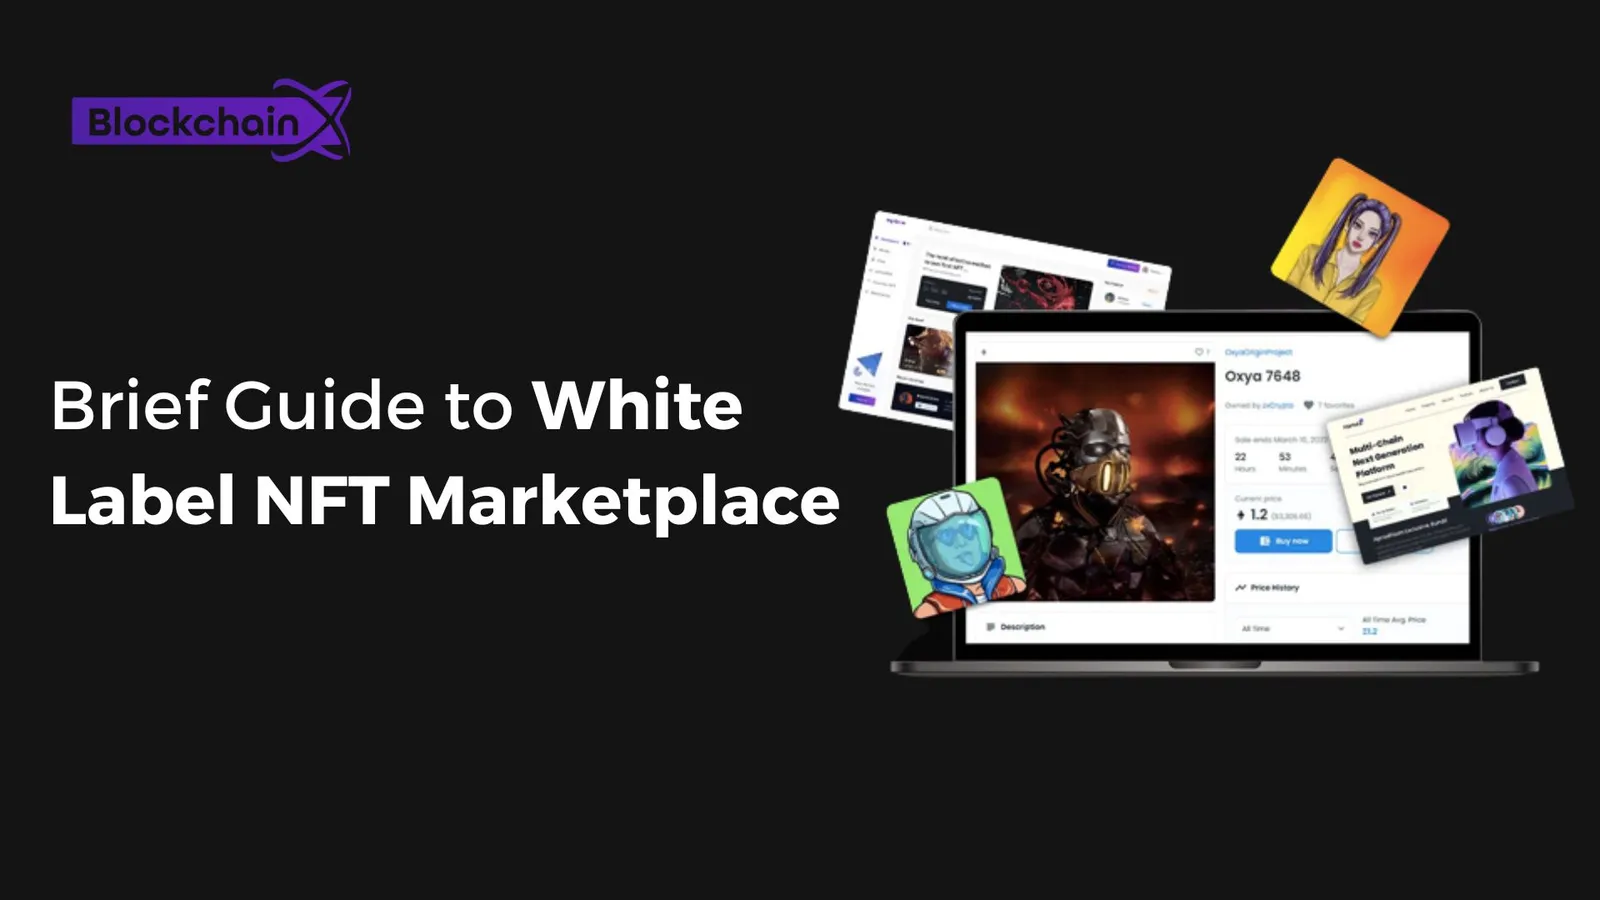 A Brief Guide to White Label NFT Marketplace